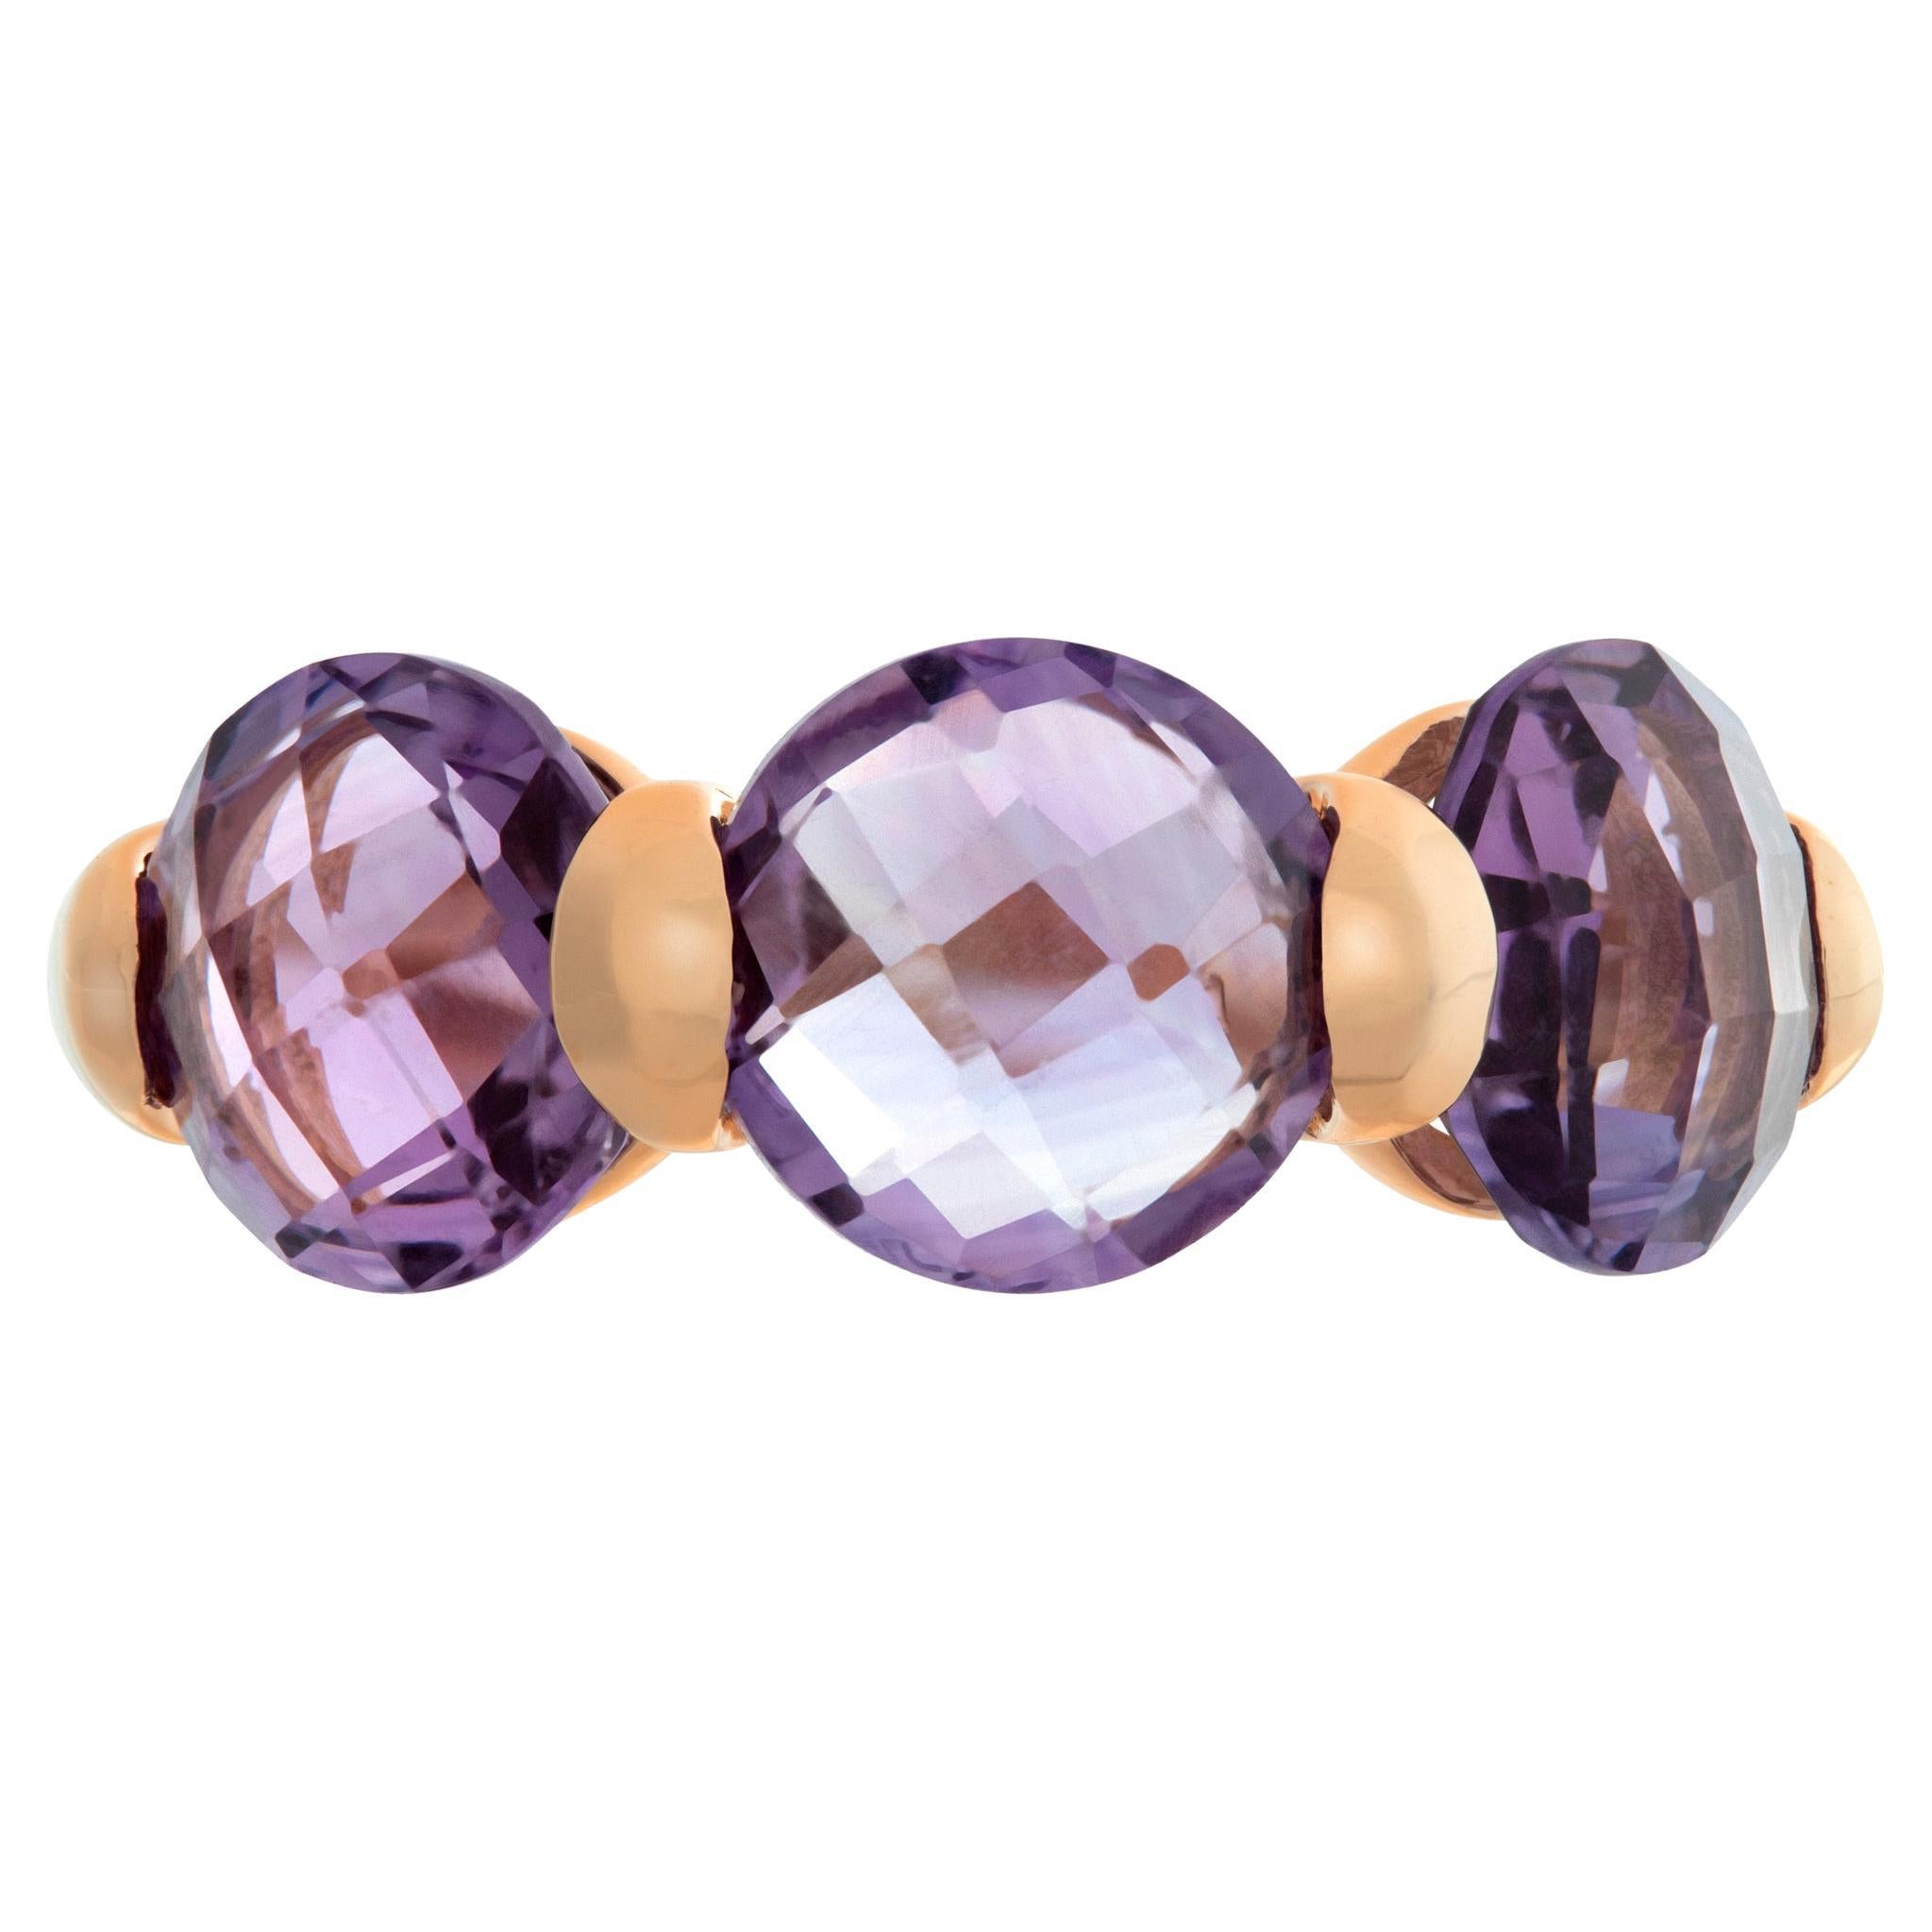 Round brilliant cut Amethyst ring set in yellow gold. Size 7.